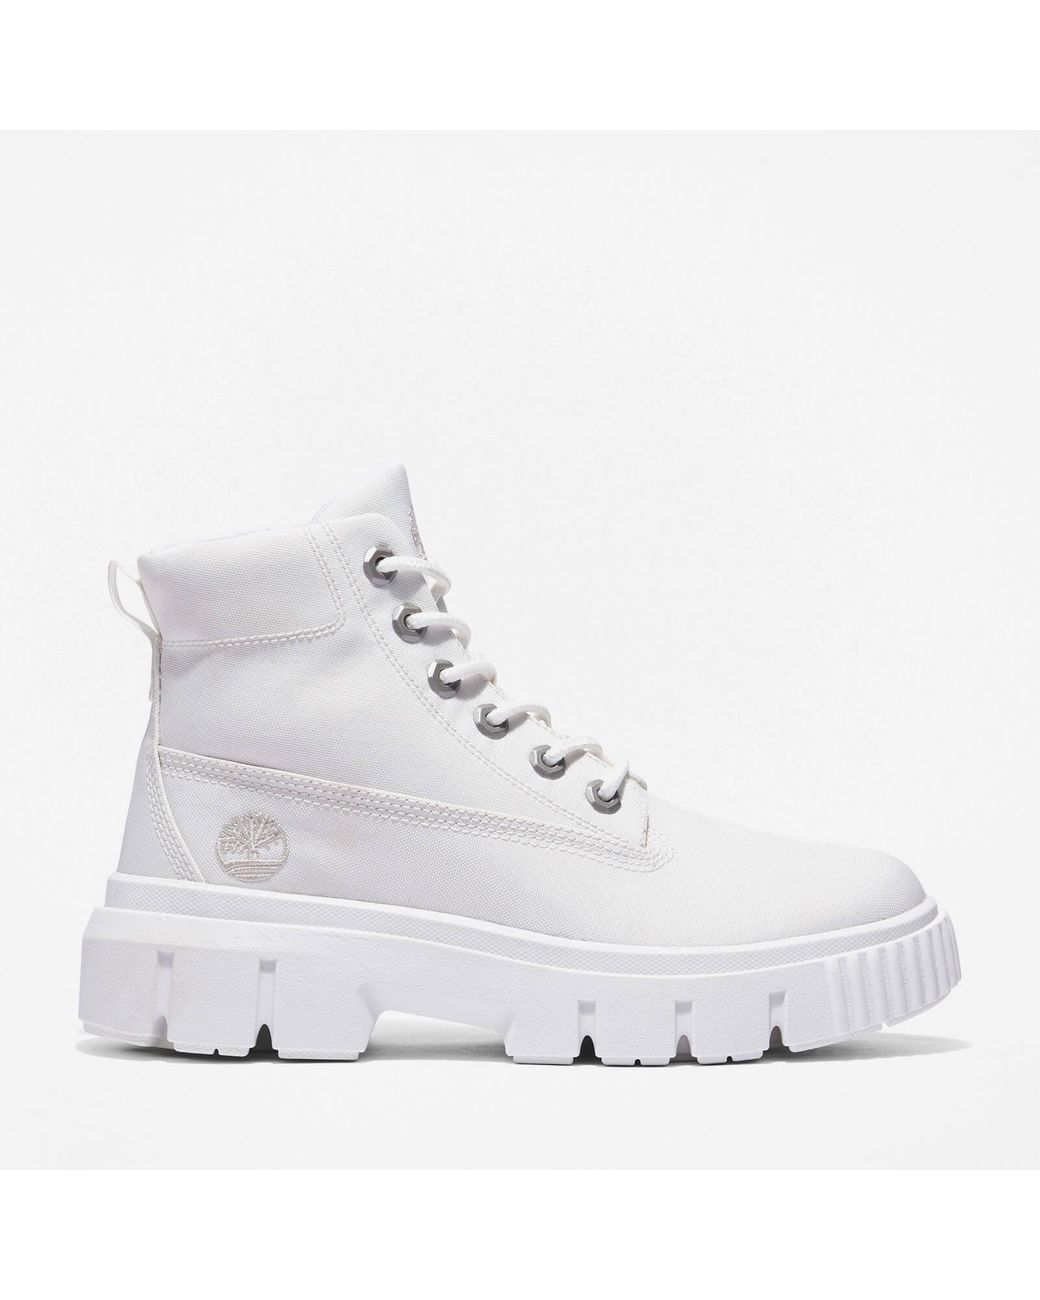 Timberland Greyfield Canvas Lace Up Boots in White | Lyst